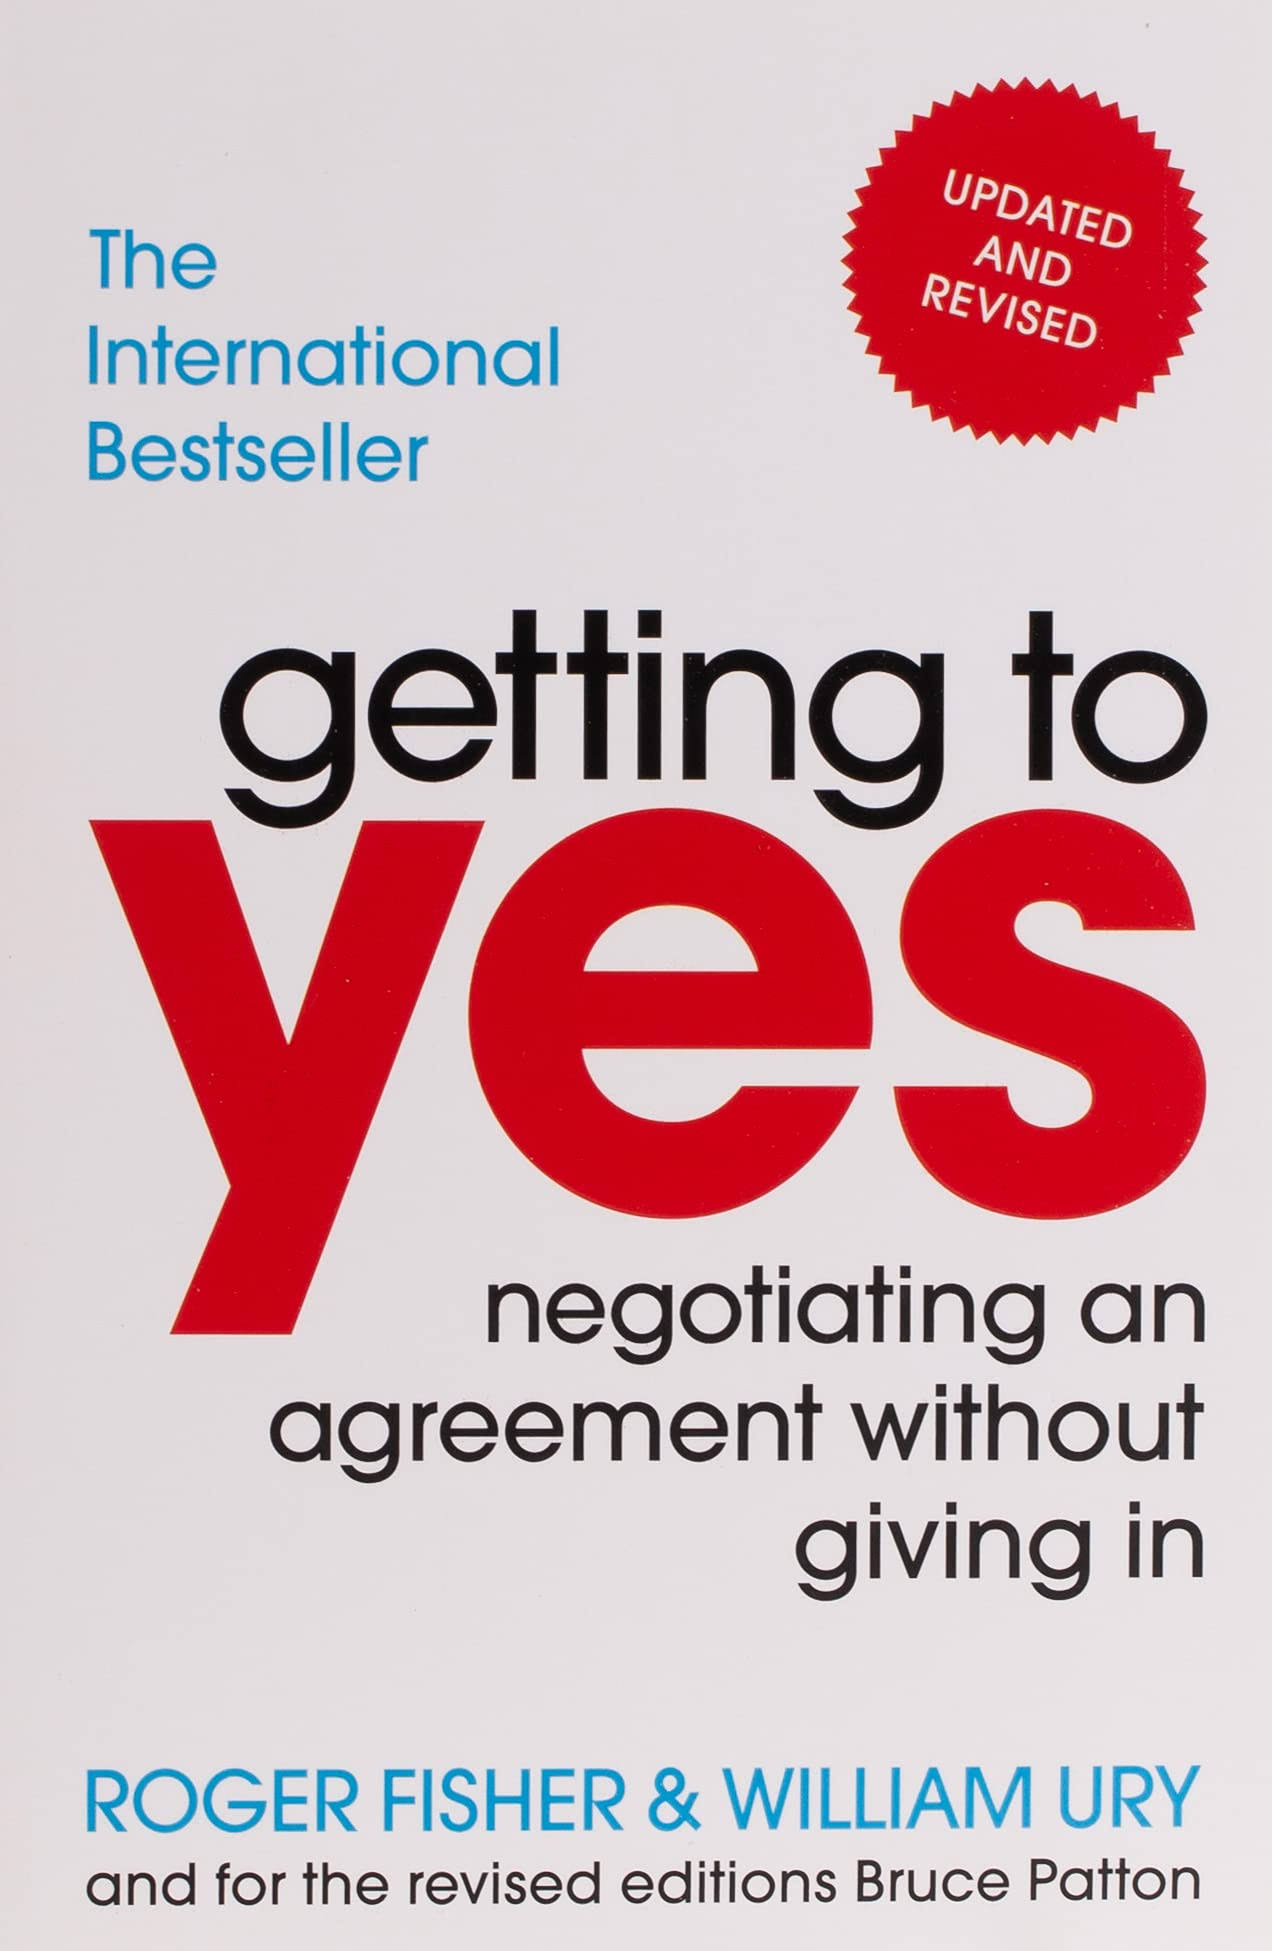 Getting to Yes: Negotiating an Agreement Without Giving In - Roger Fisher and William Ury